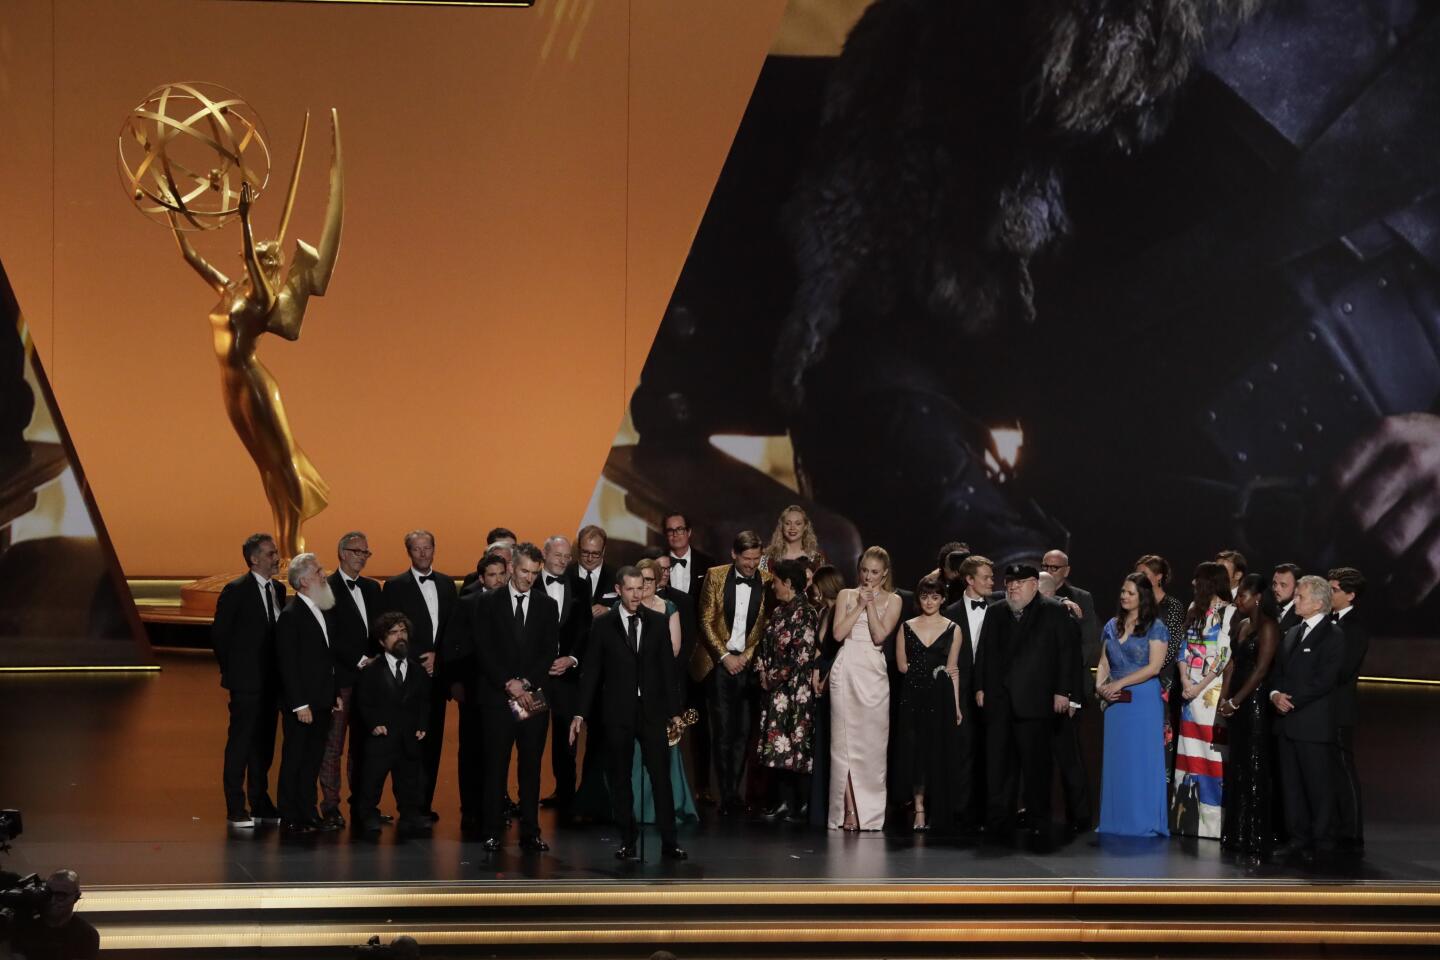 Primetime Emmy Awards 2019: Full winners list include 'Game of Thrones' and  'RuPaul's Drag Race